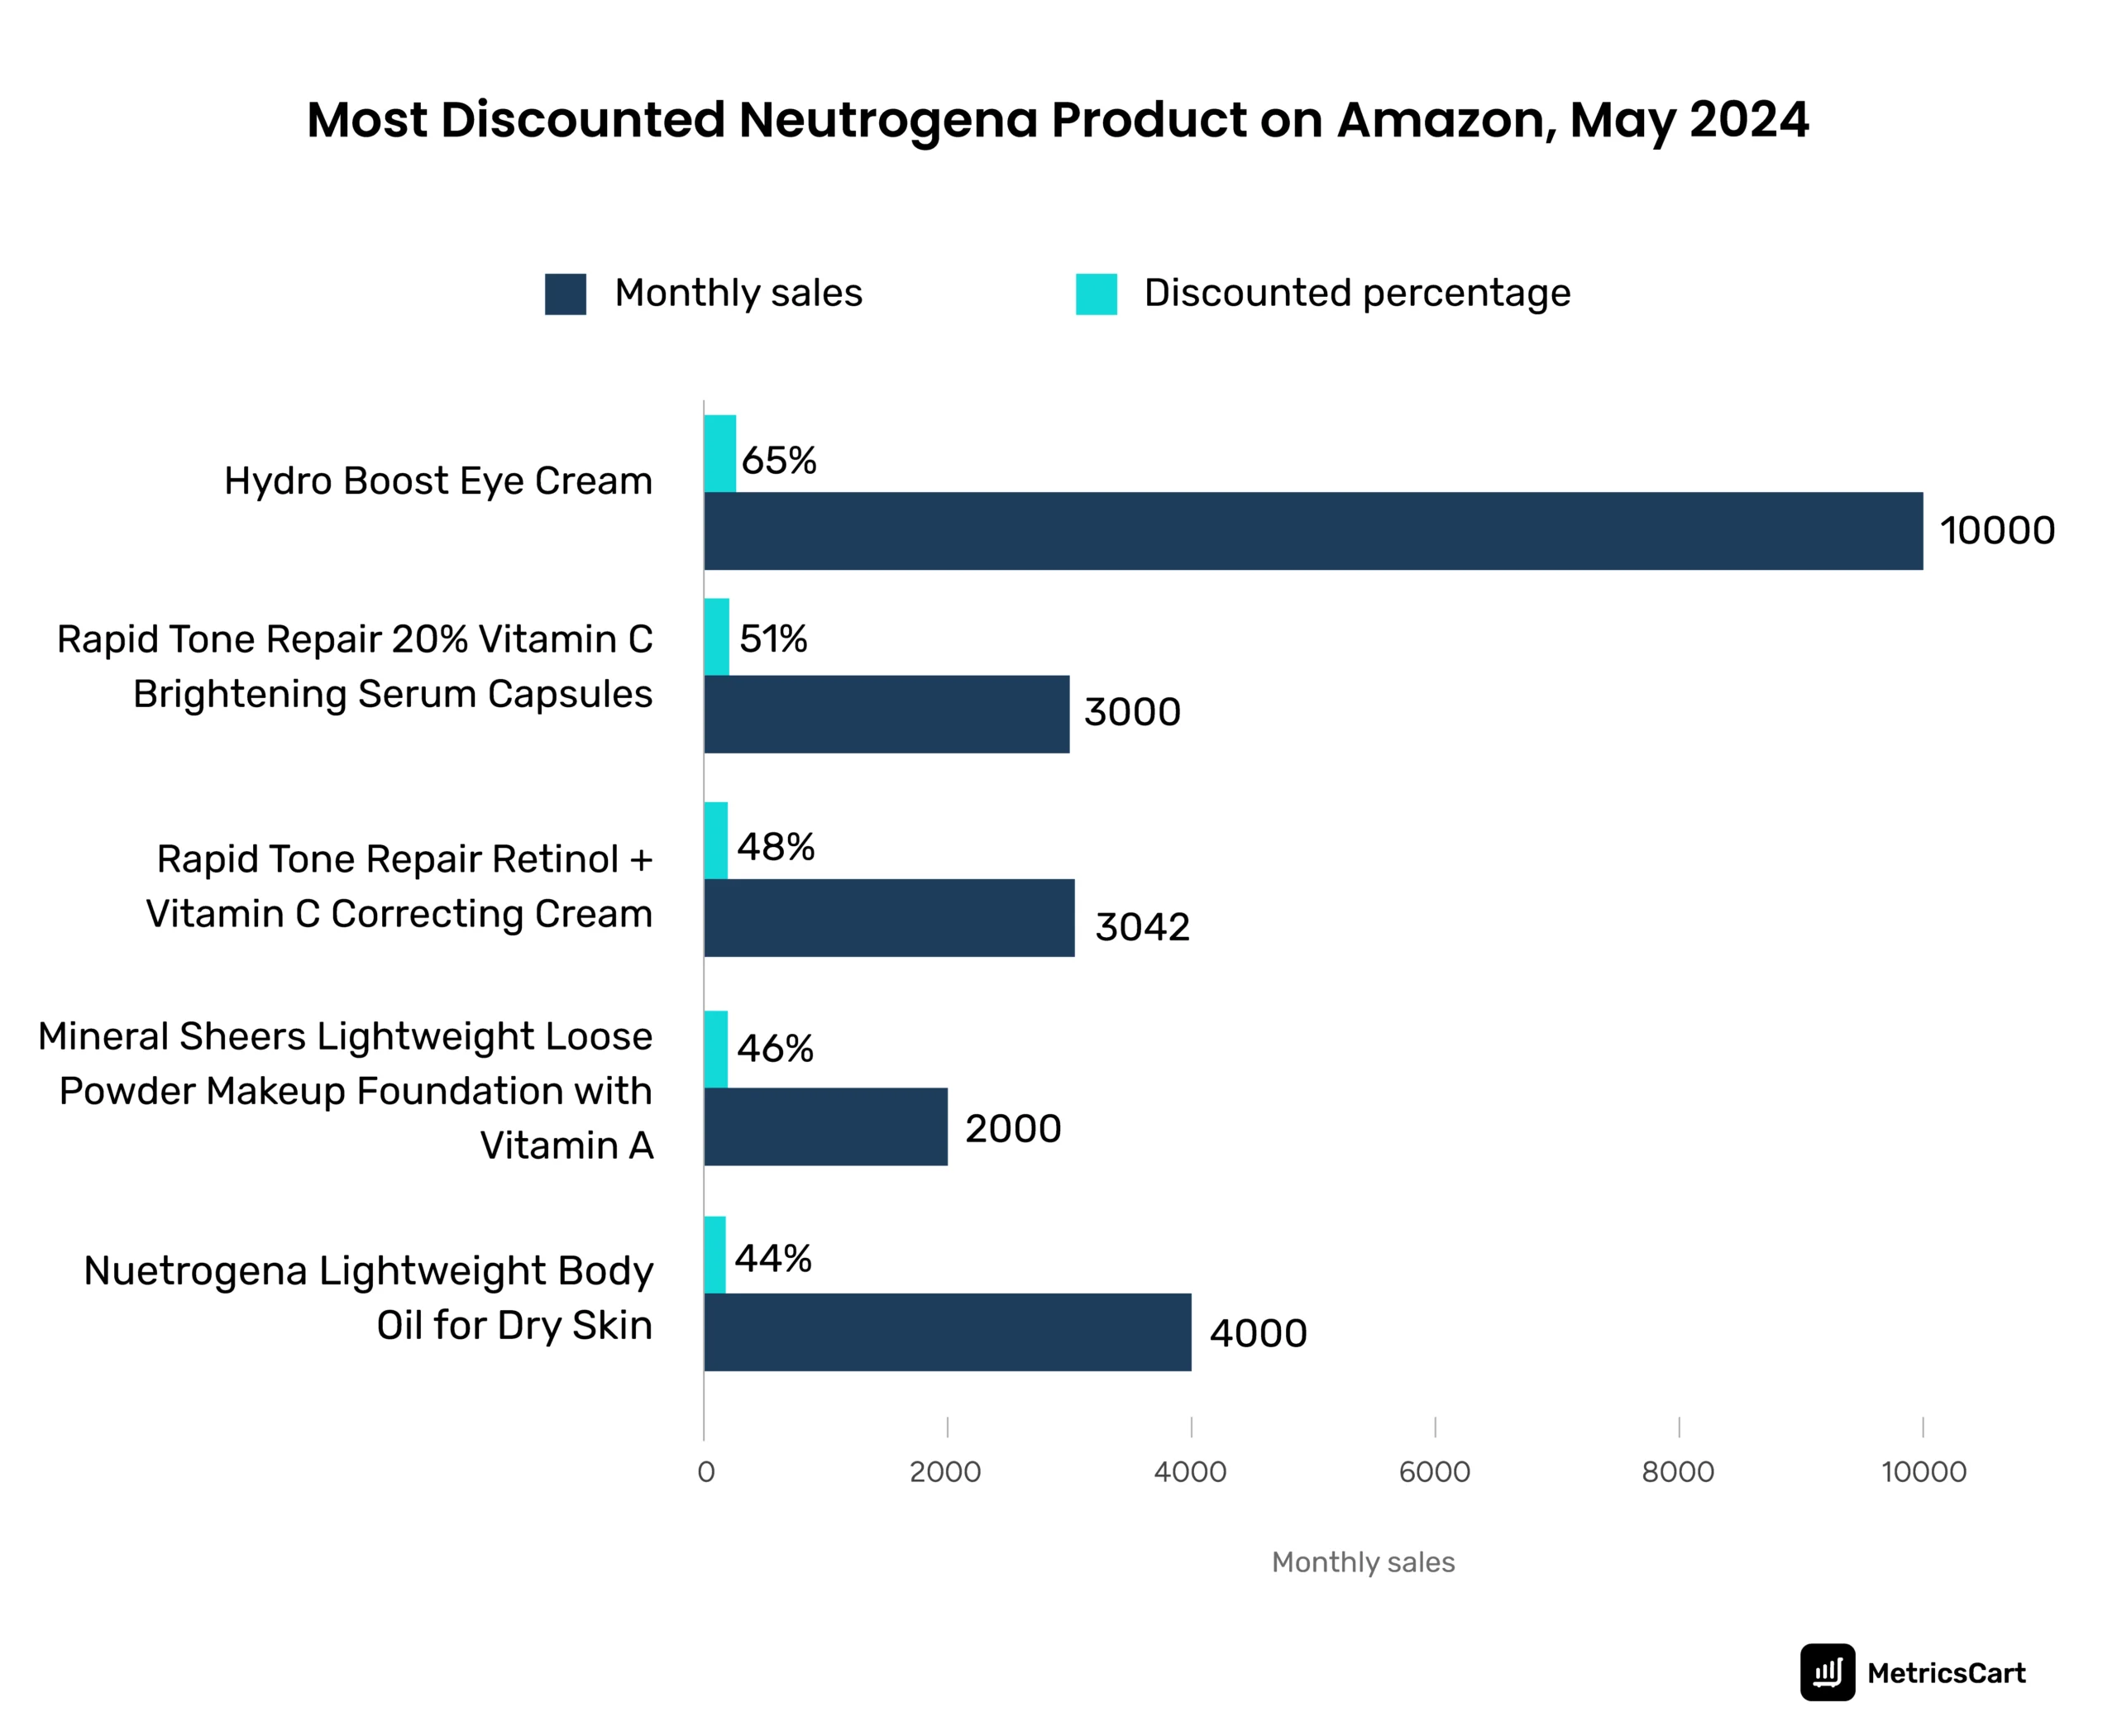 the most discounted Neutrogena product on Amazon for May 2024